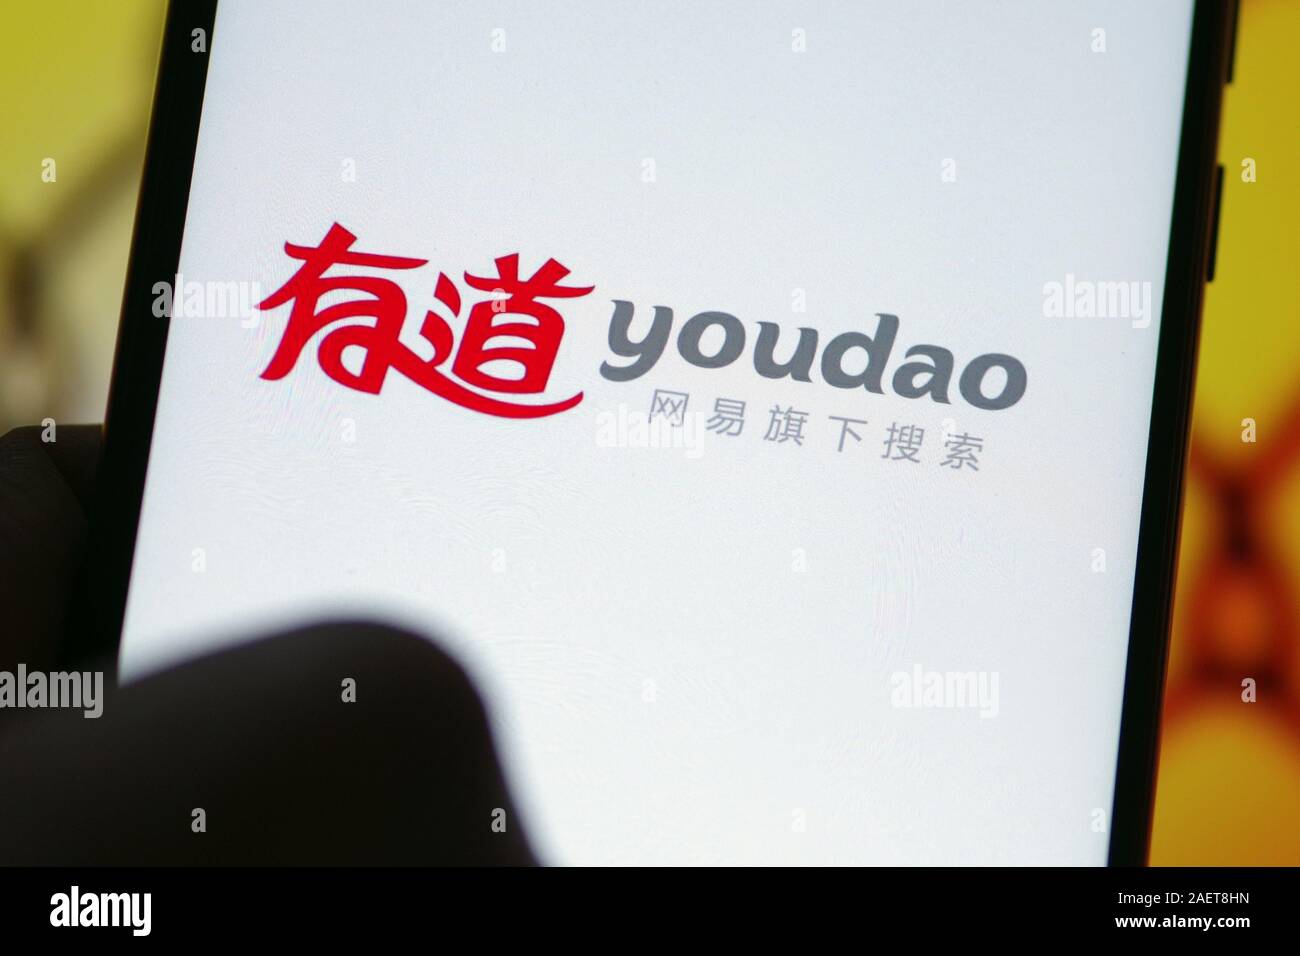 --FILE--In this unlocated photo, a user opens Youdao App, an online dictionary launched by NetEase, 14 July 2019. NetEase Inc. (Nasdaq: NTES) and its Stock Photo